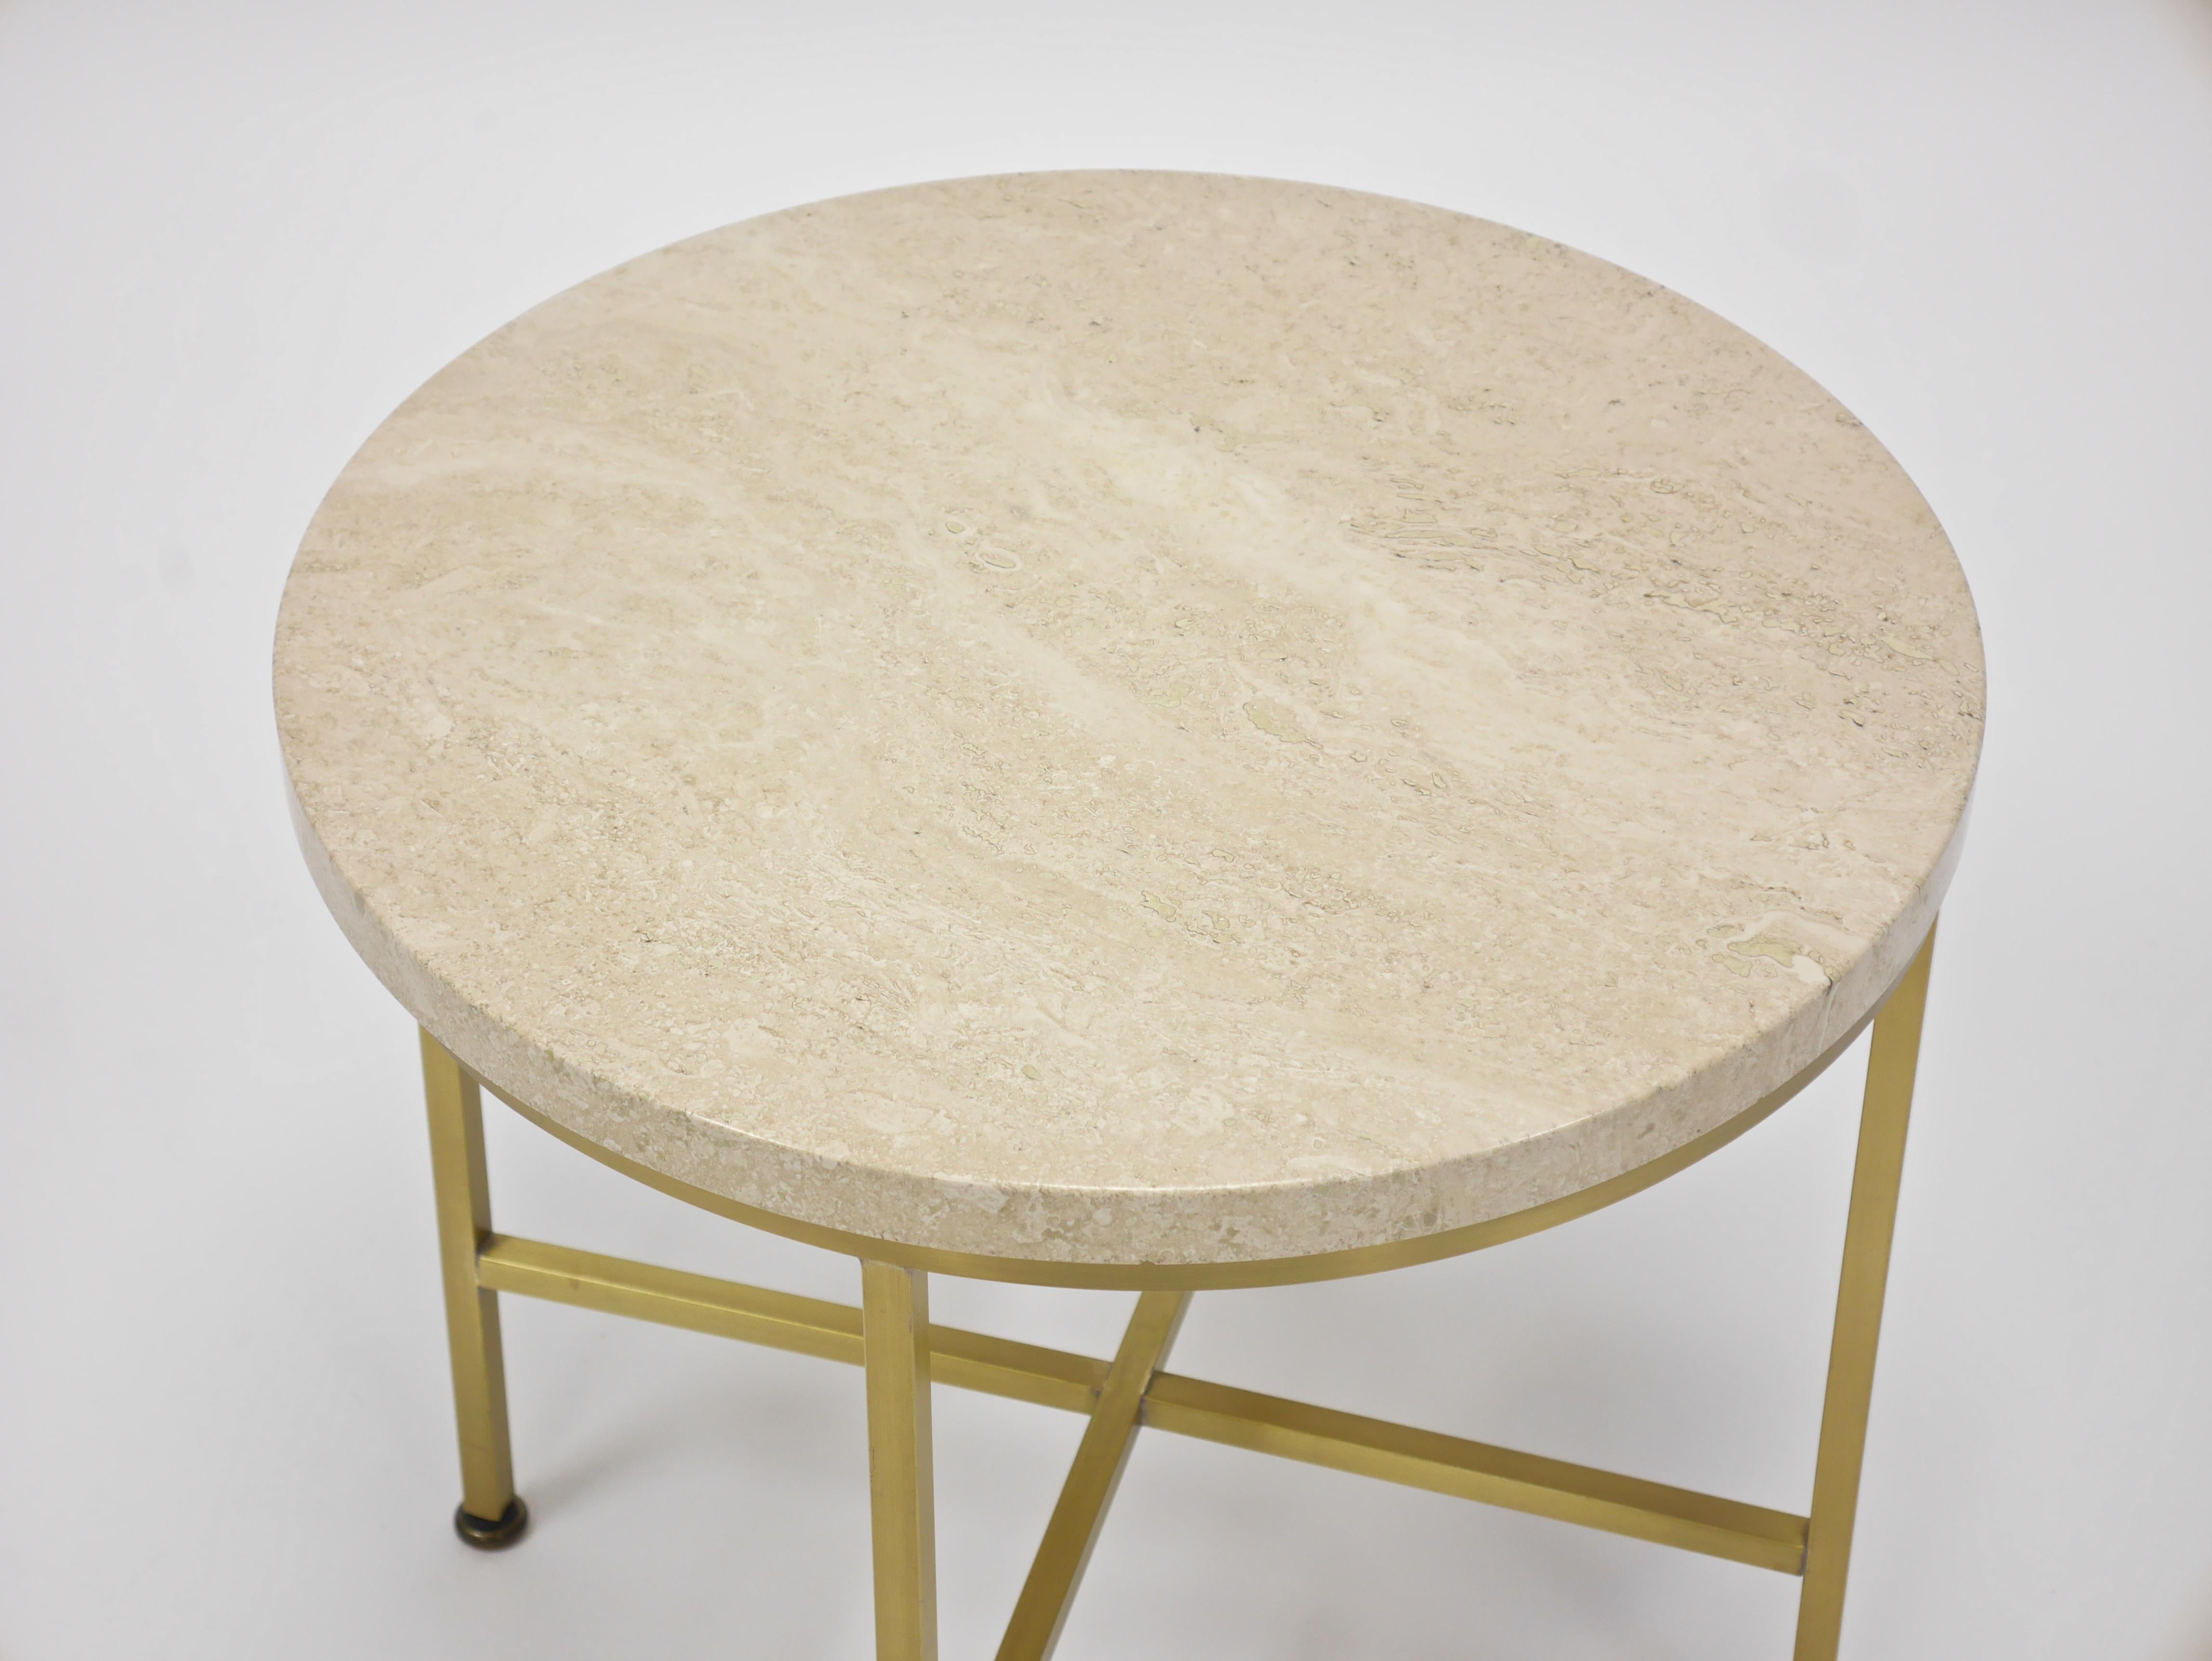 Rare Brass and Travertine Cigarette Table by Paul McCobb In Excellent Condition For Sale In Hadley, MA